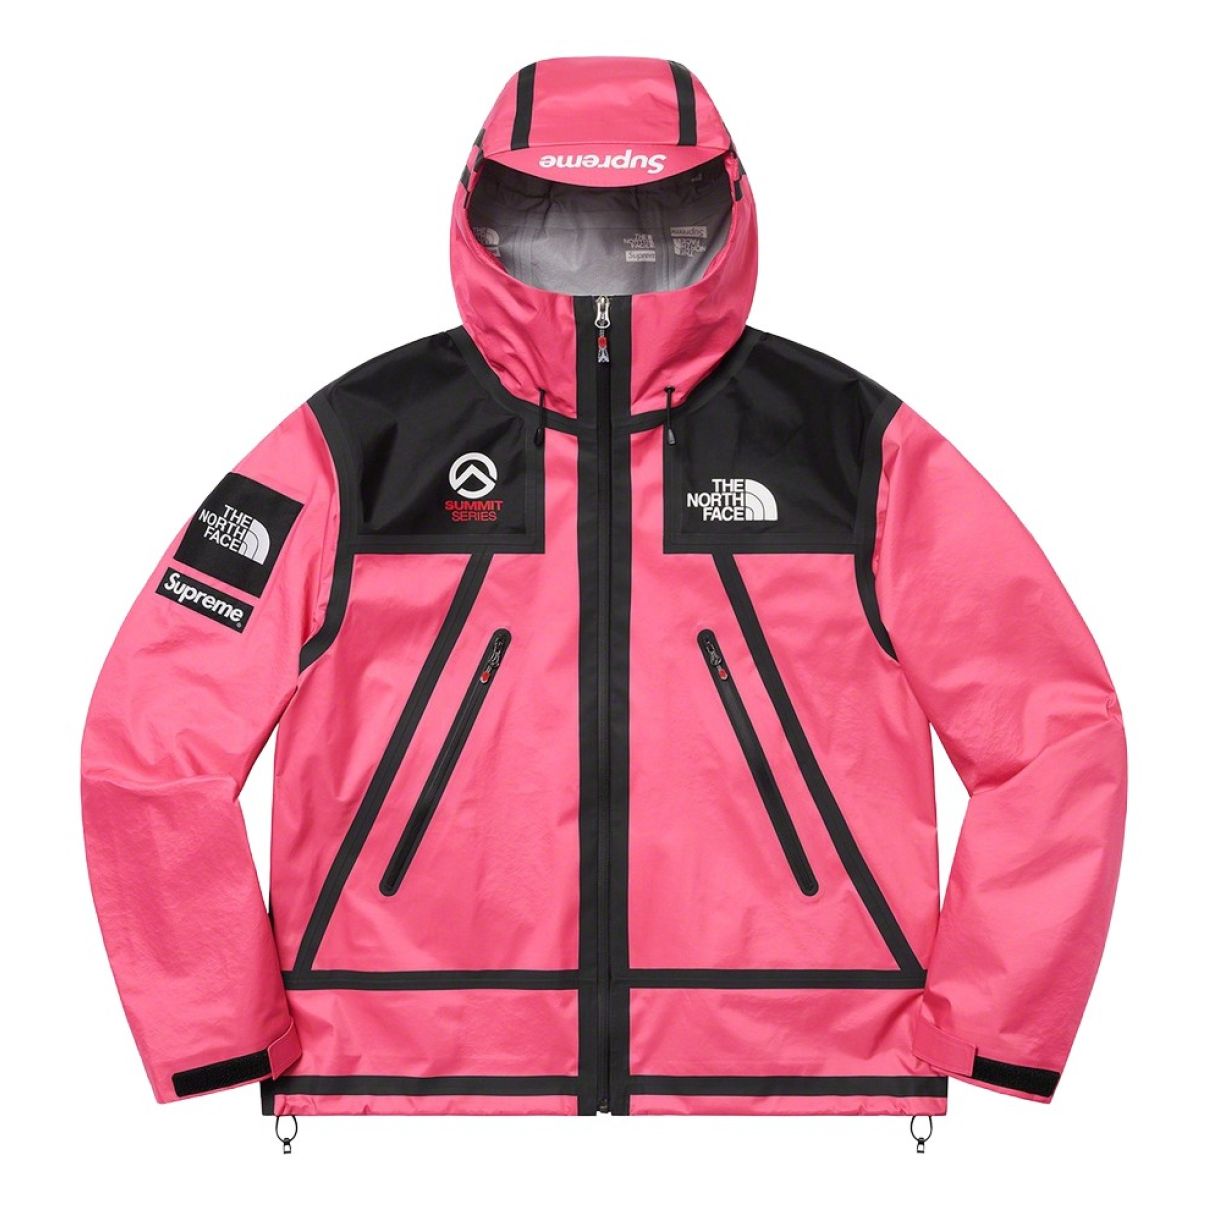 Pre-owned SUPREME x THE NORTH FACE - Buy or Sell Luxury items 